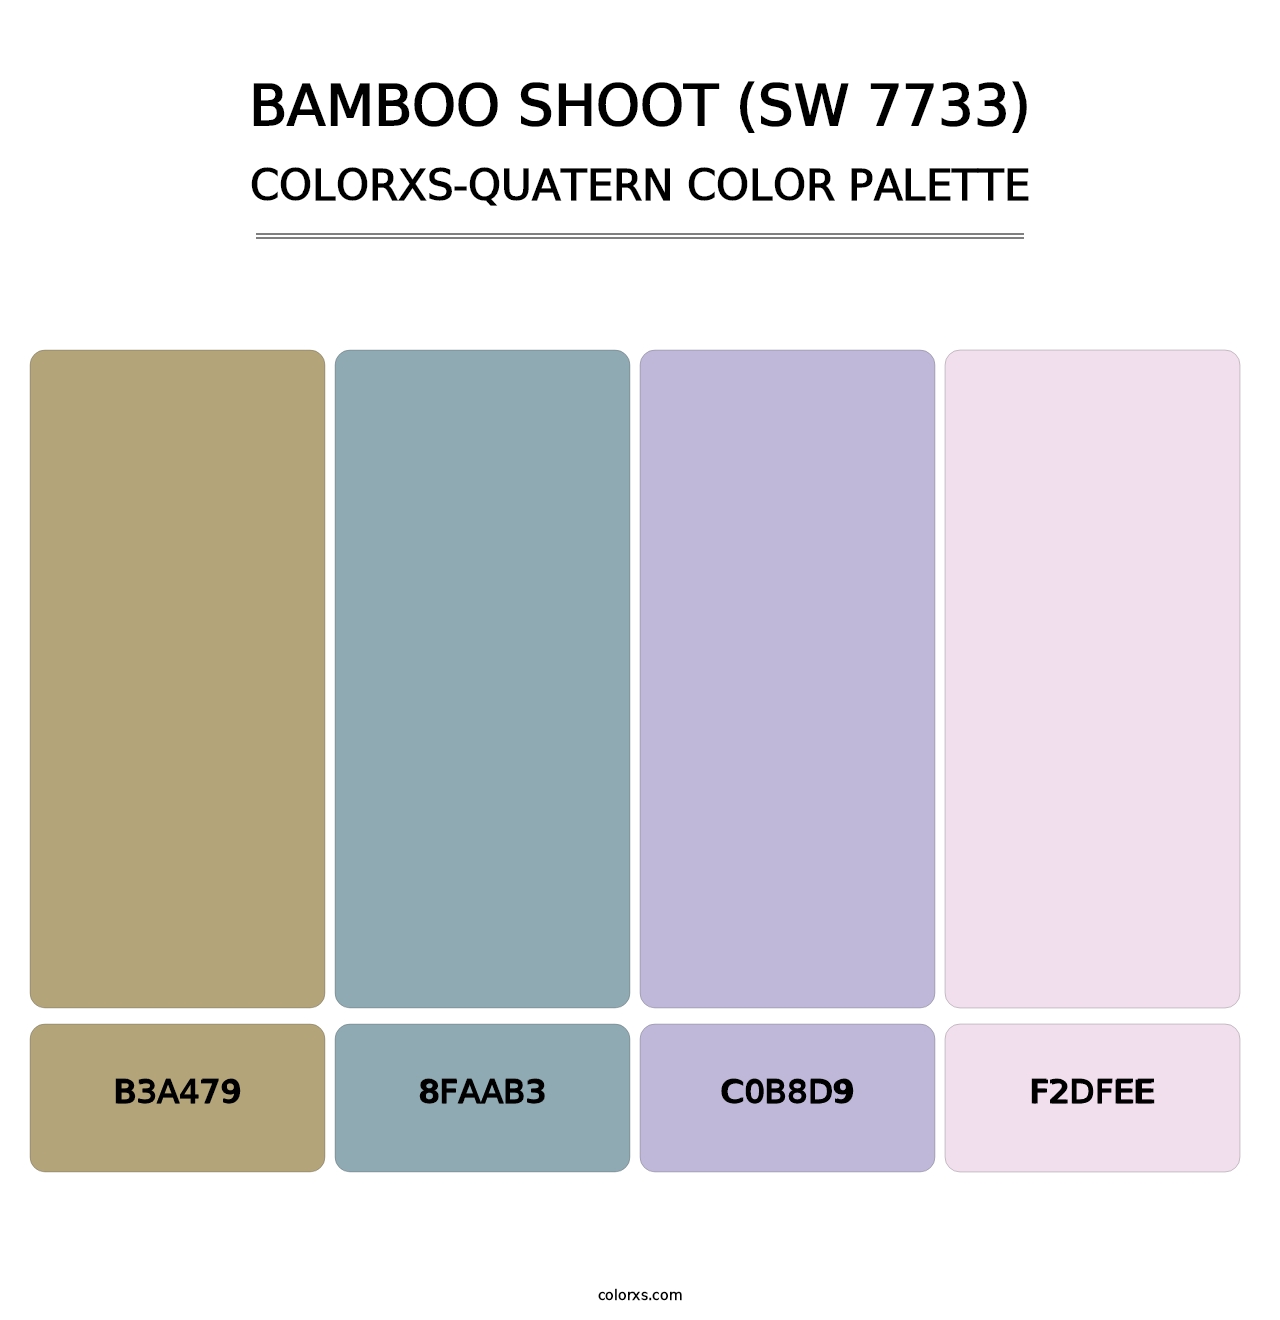 Bamboo Shoot (SW 7733) - Colorxs Quatern Palette